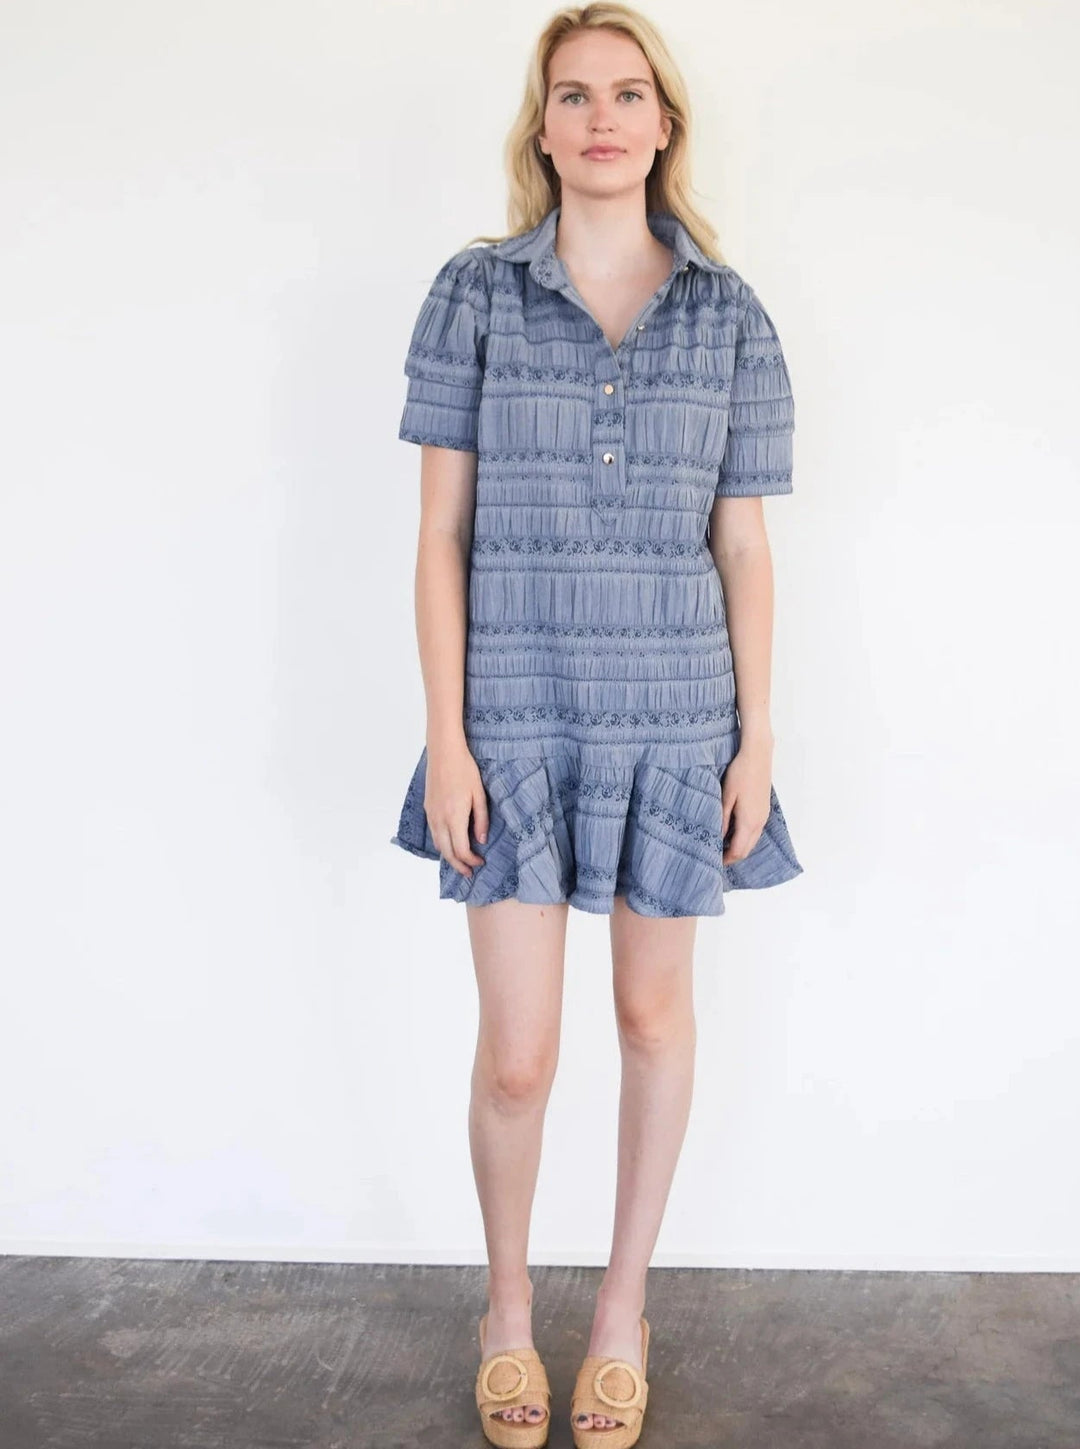 Never A Wallflower Dress Everything Short Sleeve Dress with Ruffle in Blue Floral Jacquard